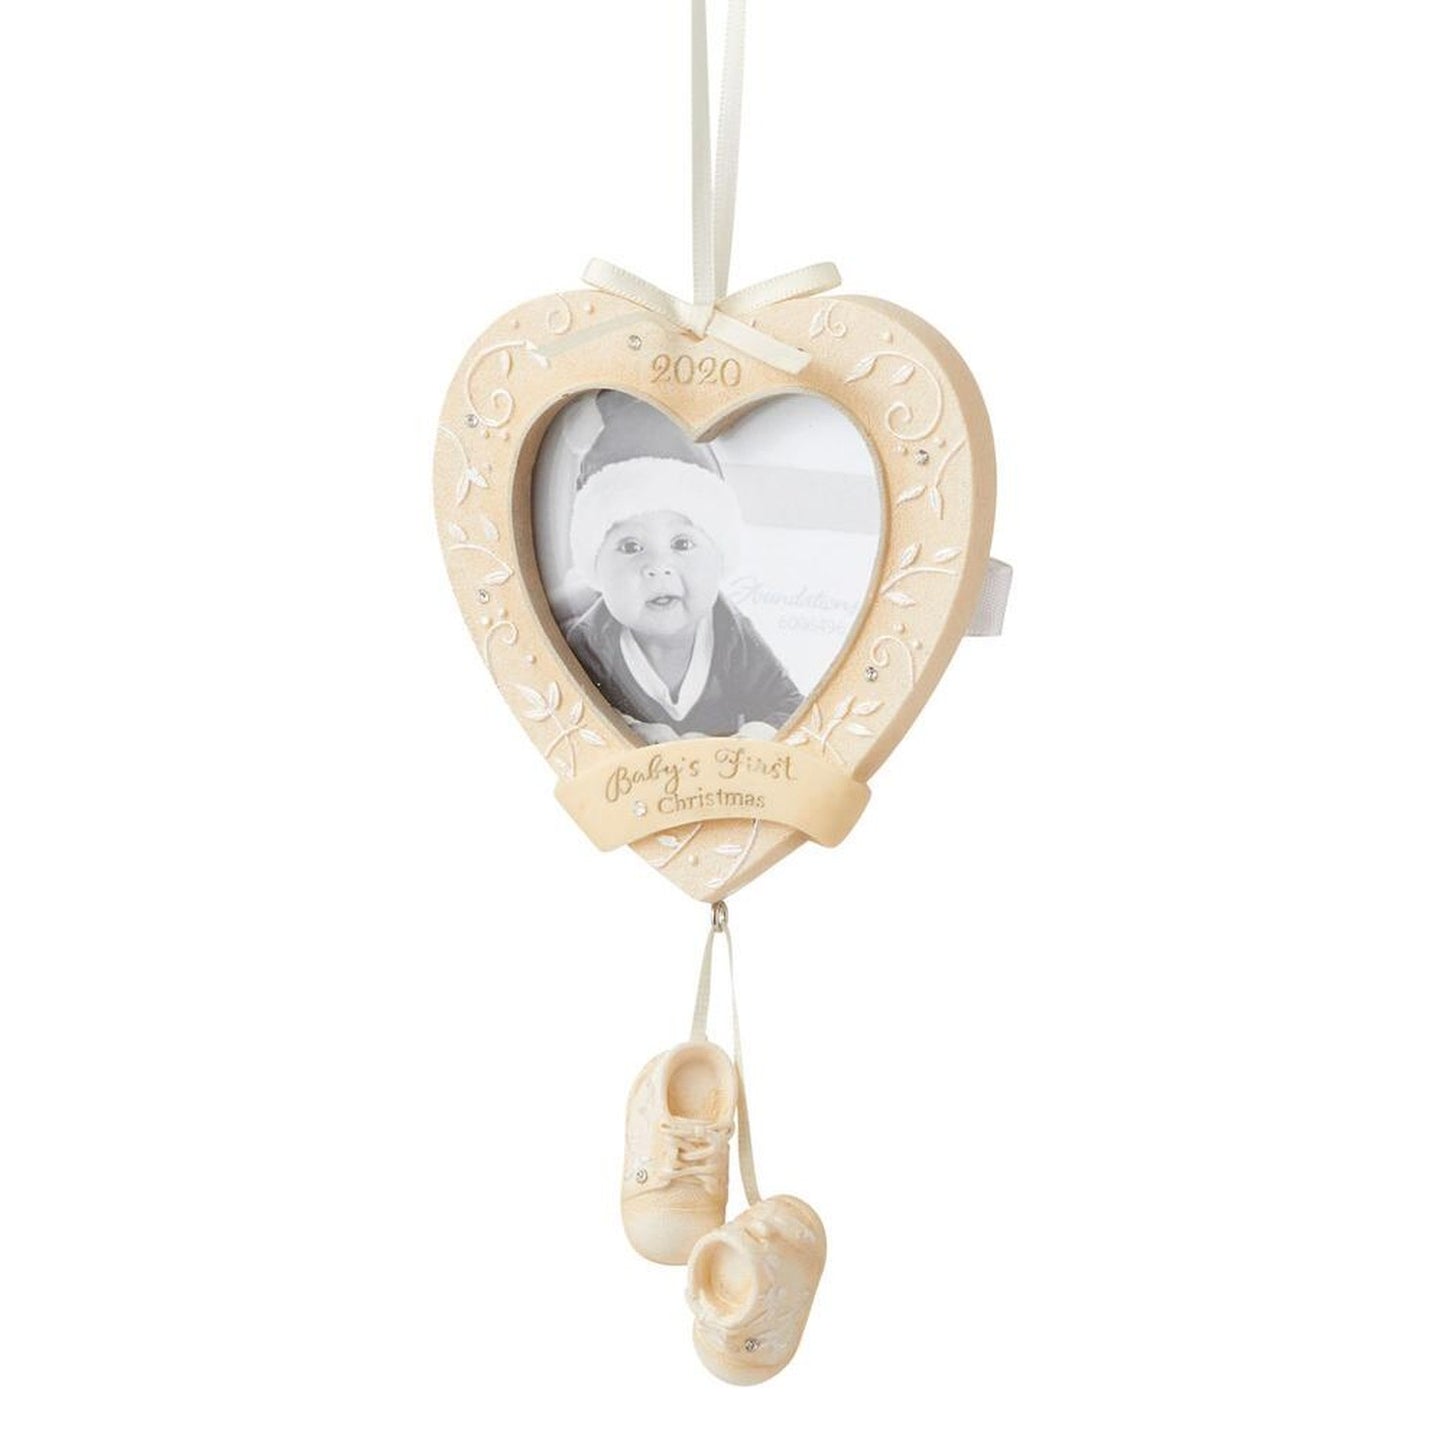 Enesco Foundations Found Babies First Hanging Ornament